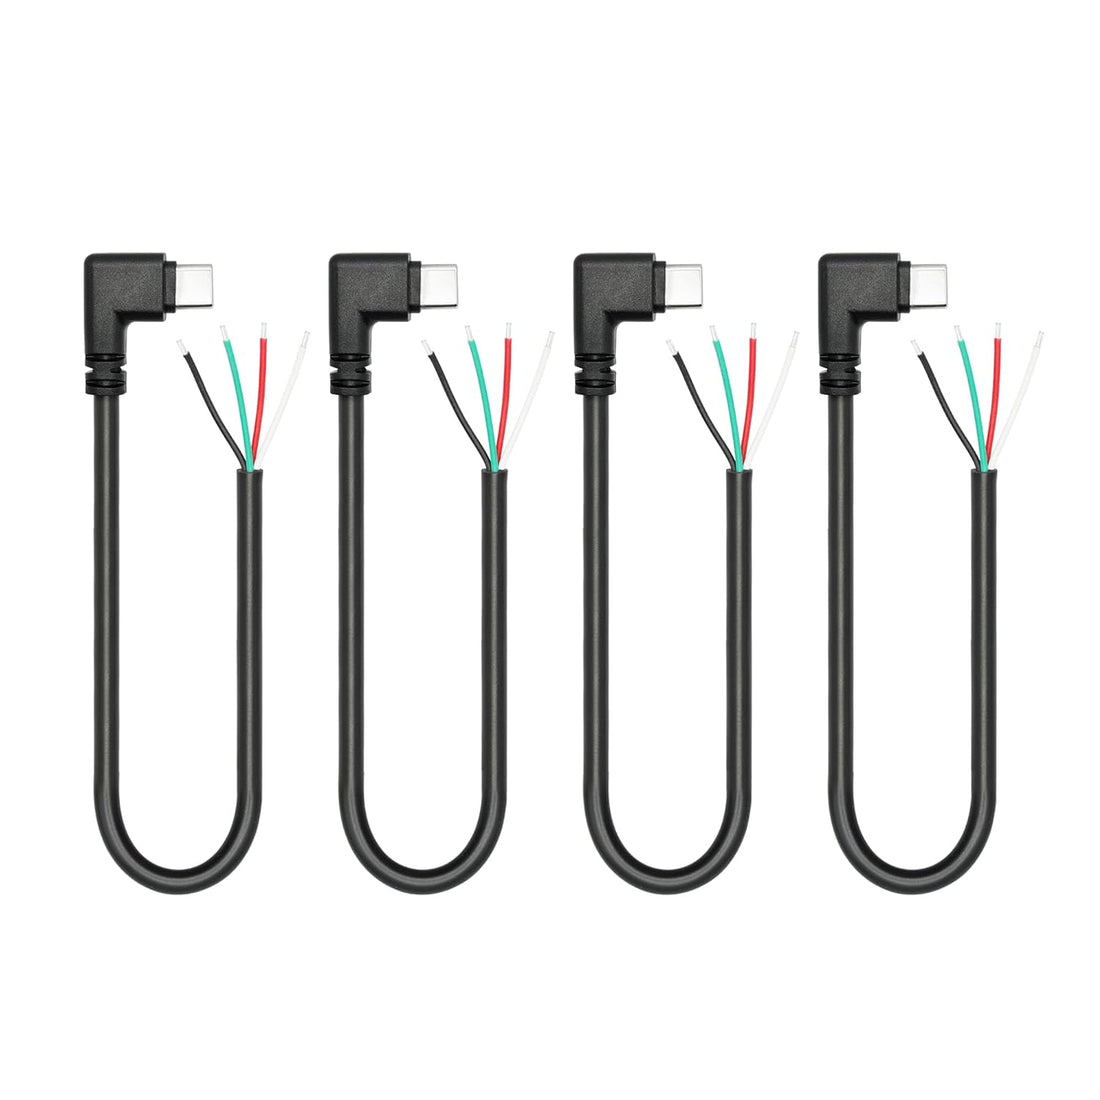 4Pcs Short Right Angle USB C to 4 Pin Bare Wire Open End Wire 11inch, 90 Degree USB Type C Male Plug 4 Pin Pigtail Power and Data Cable 22AWG 5V/3A, for USB Type C Device Replacement Repair DIY Cable